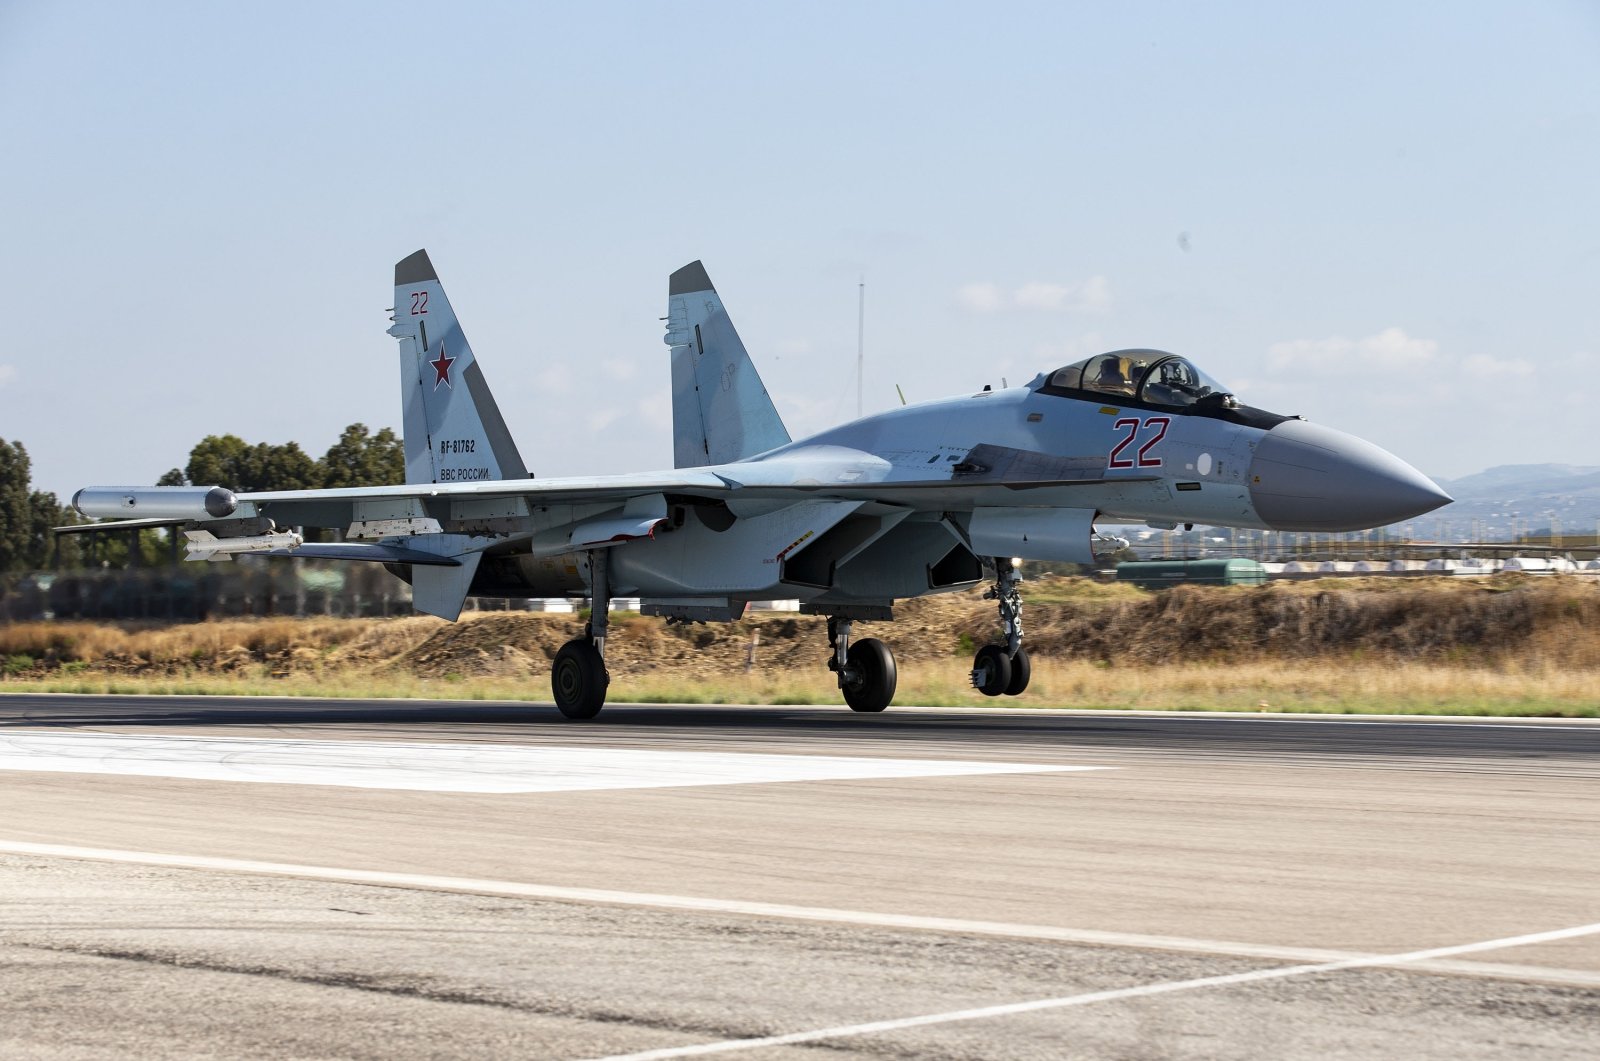 A Russian Su-35 fighter jet takes off at Hemeimeem air base in Syria, Sept. 26, 2019. (AP Photo)